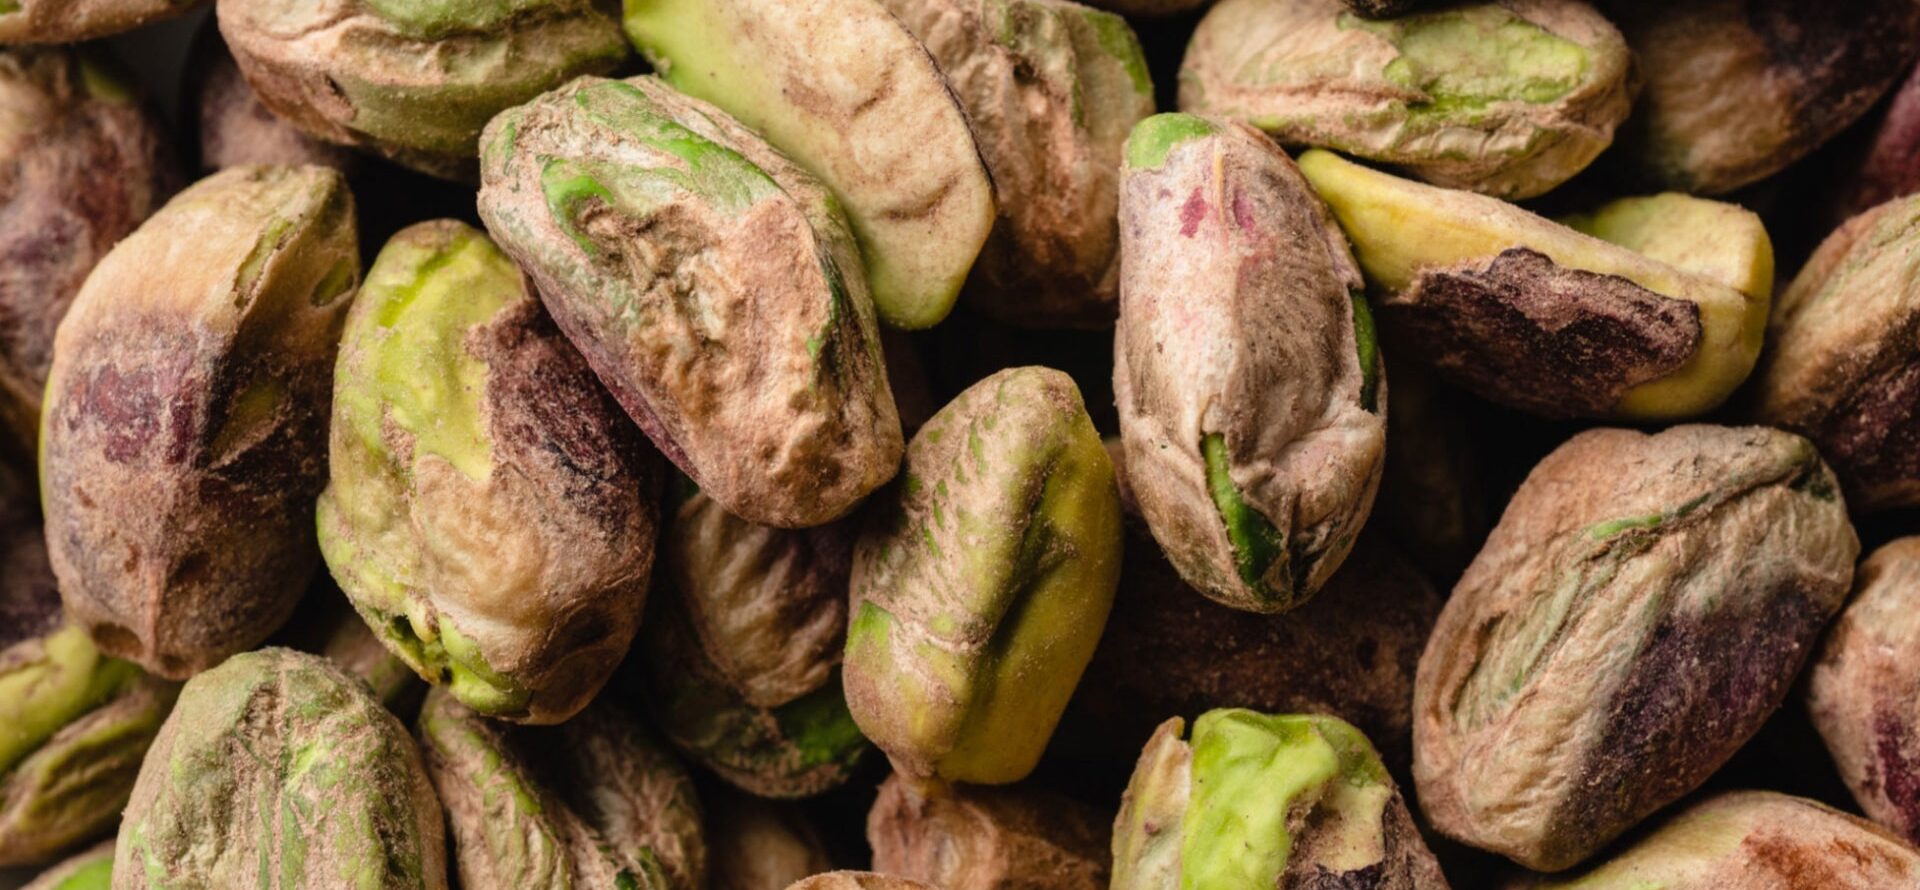 California Pistachios Now Available in Airports Worldwide